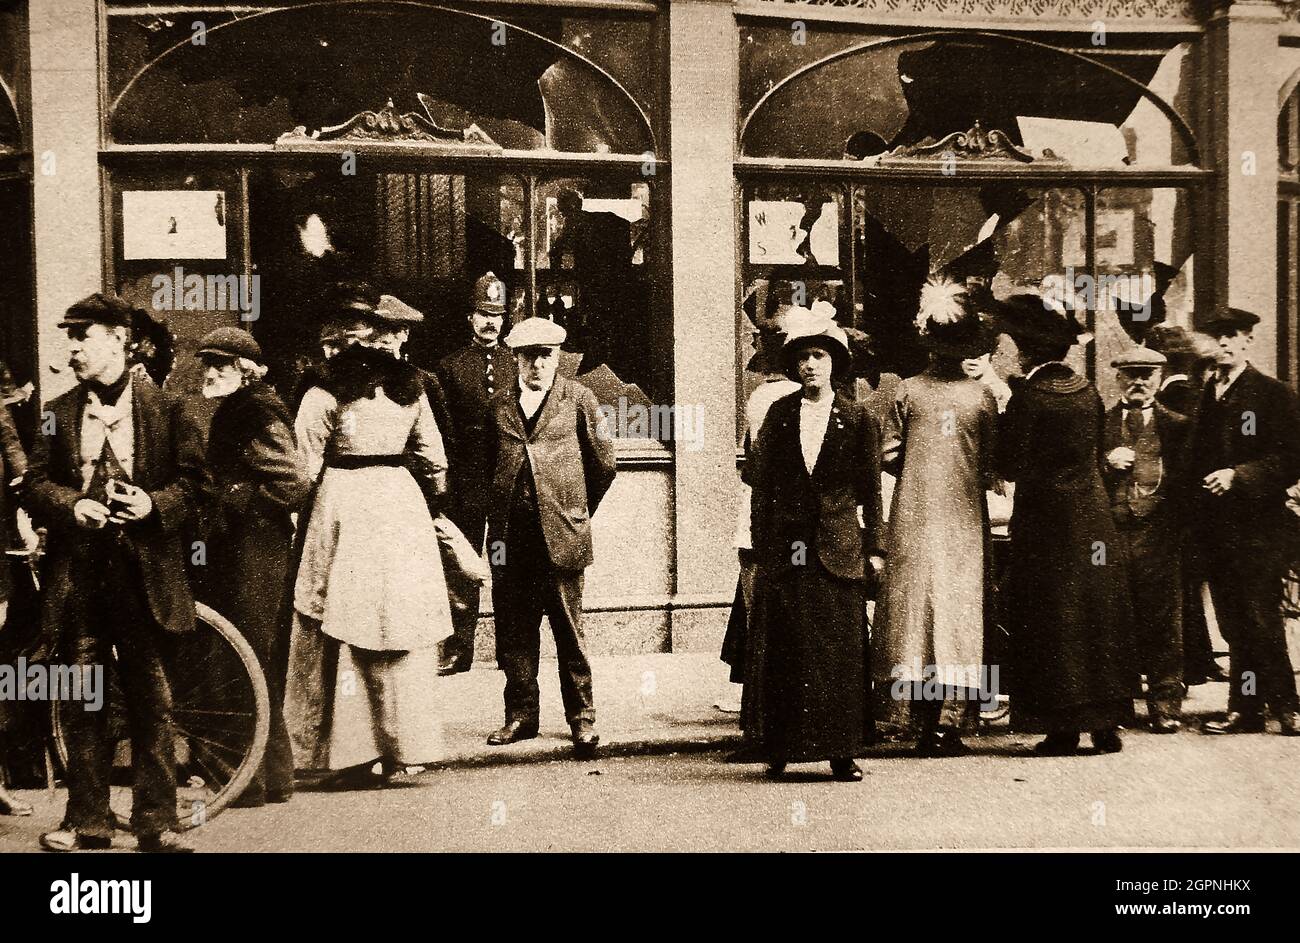 WWI - Deptford England - Anti German feeling led to destruction of windows in German owned businesses in Britain. Business continued as normal but with policemen (bobbies) standing guard Stock Photo